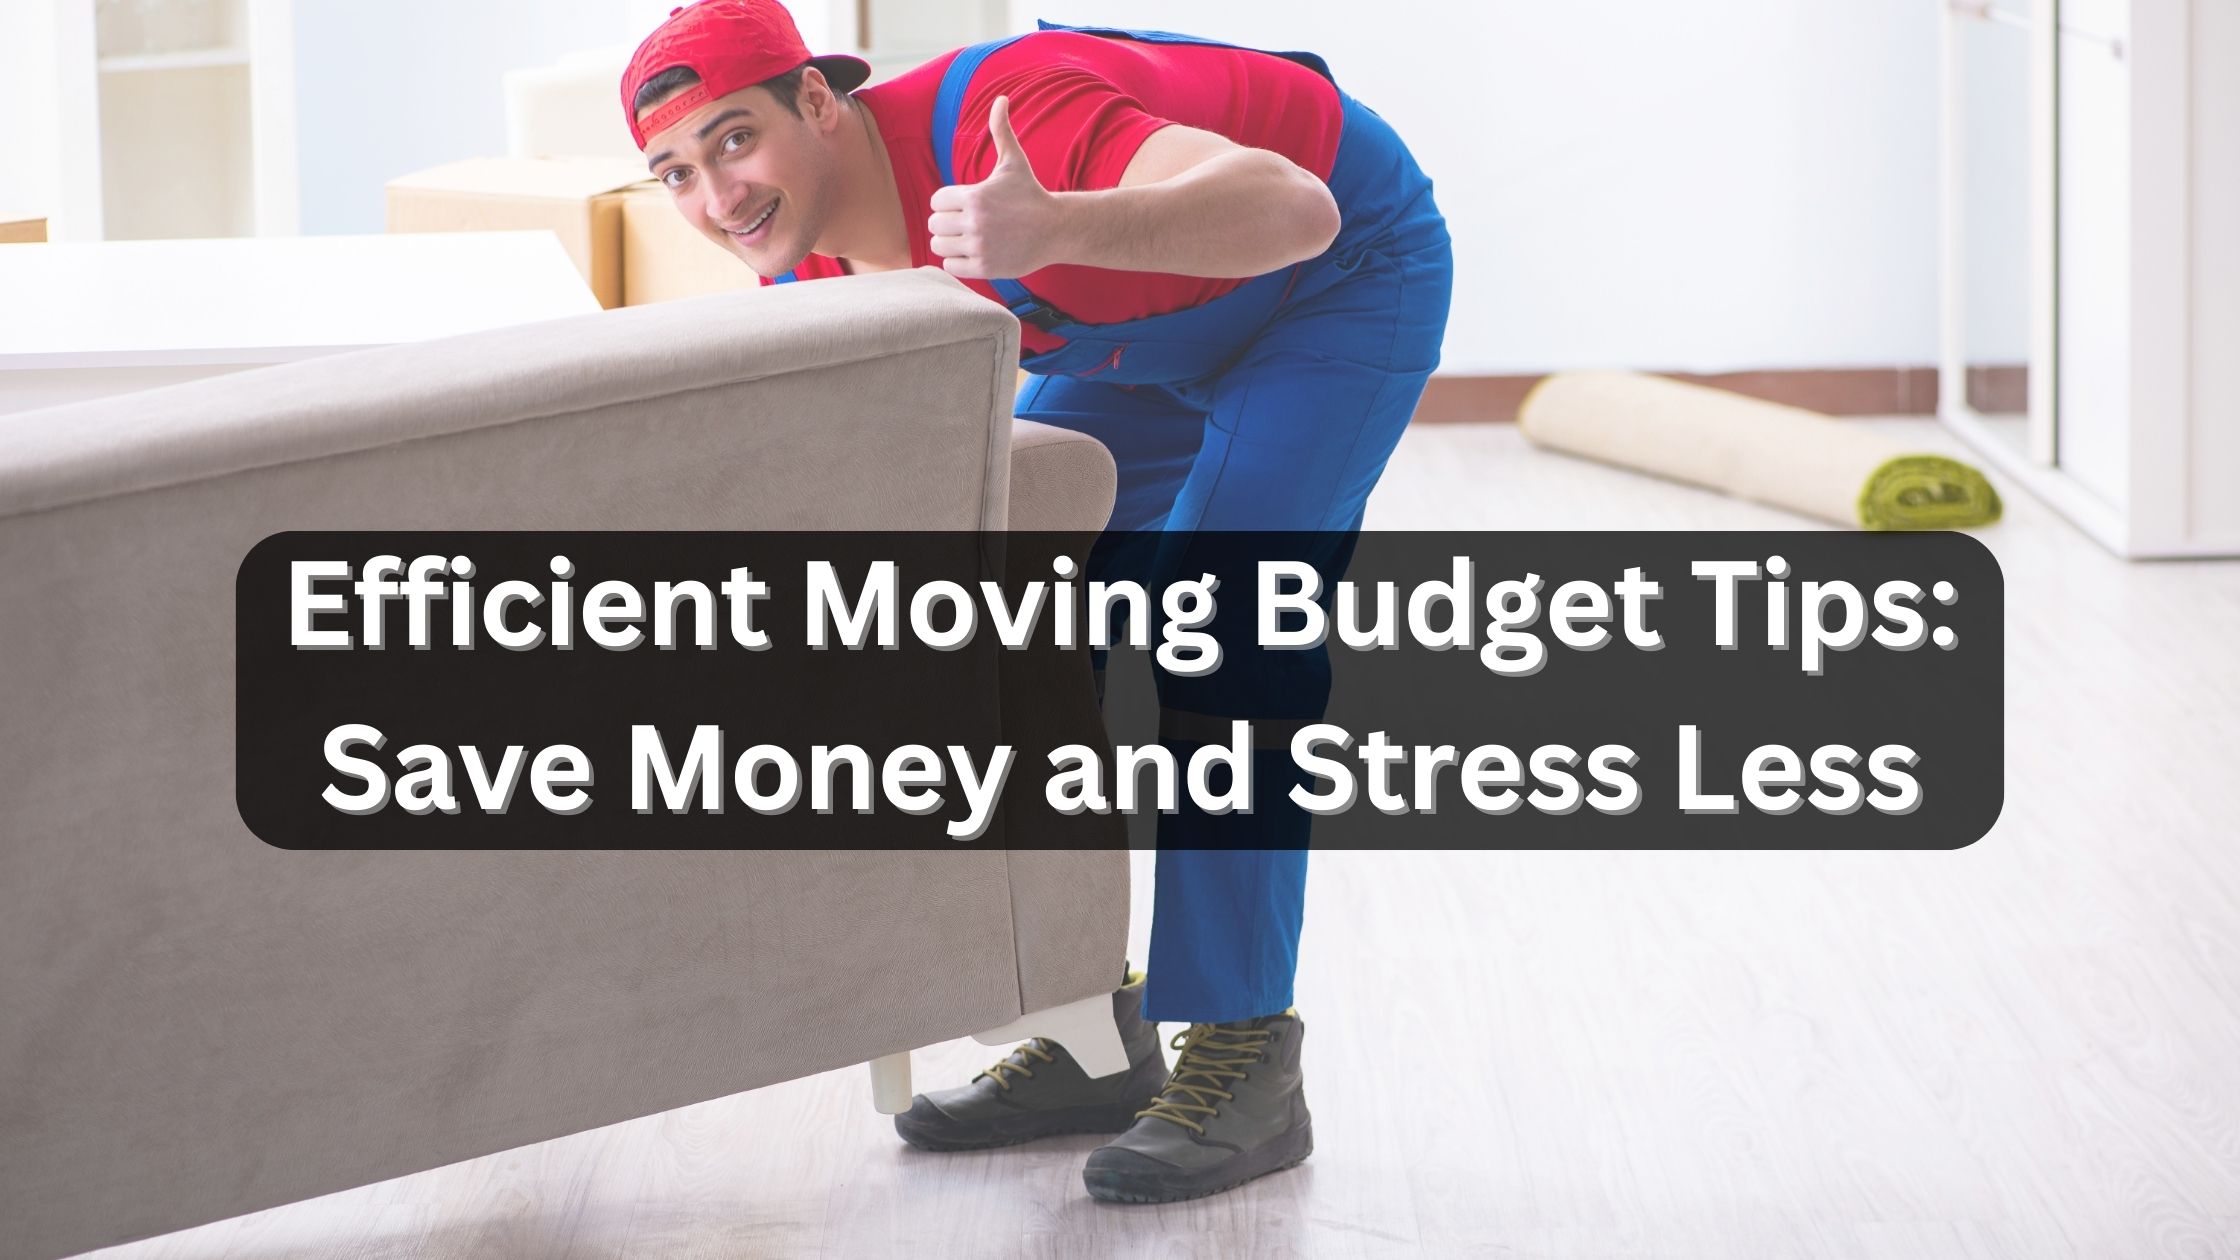 Efficient moving budget tips save money and stress less